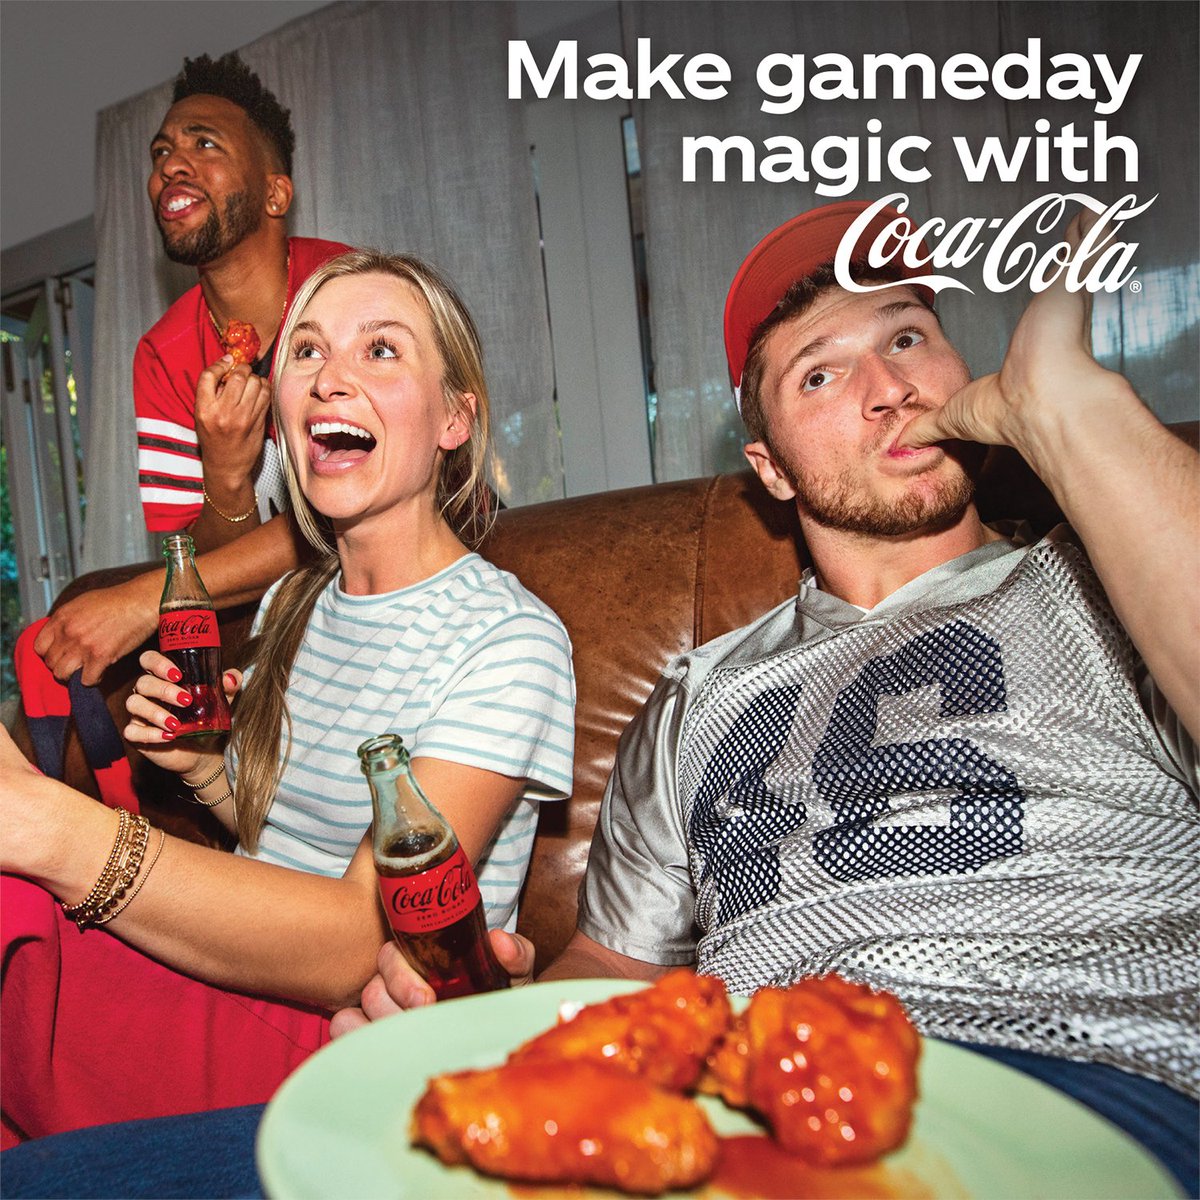 Football Sundays are back! Stay refreshed during every play with Coke Zero Sugar.